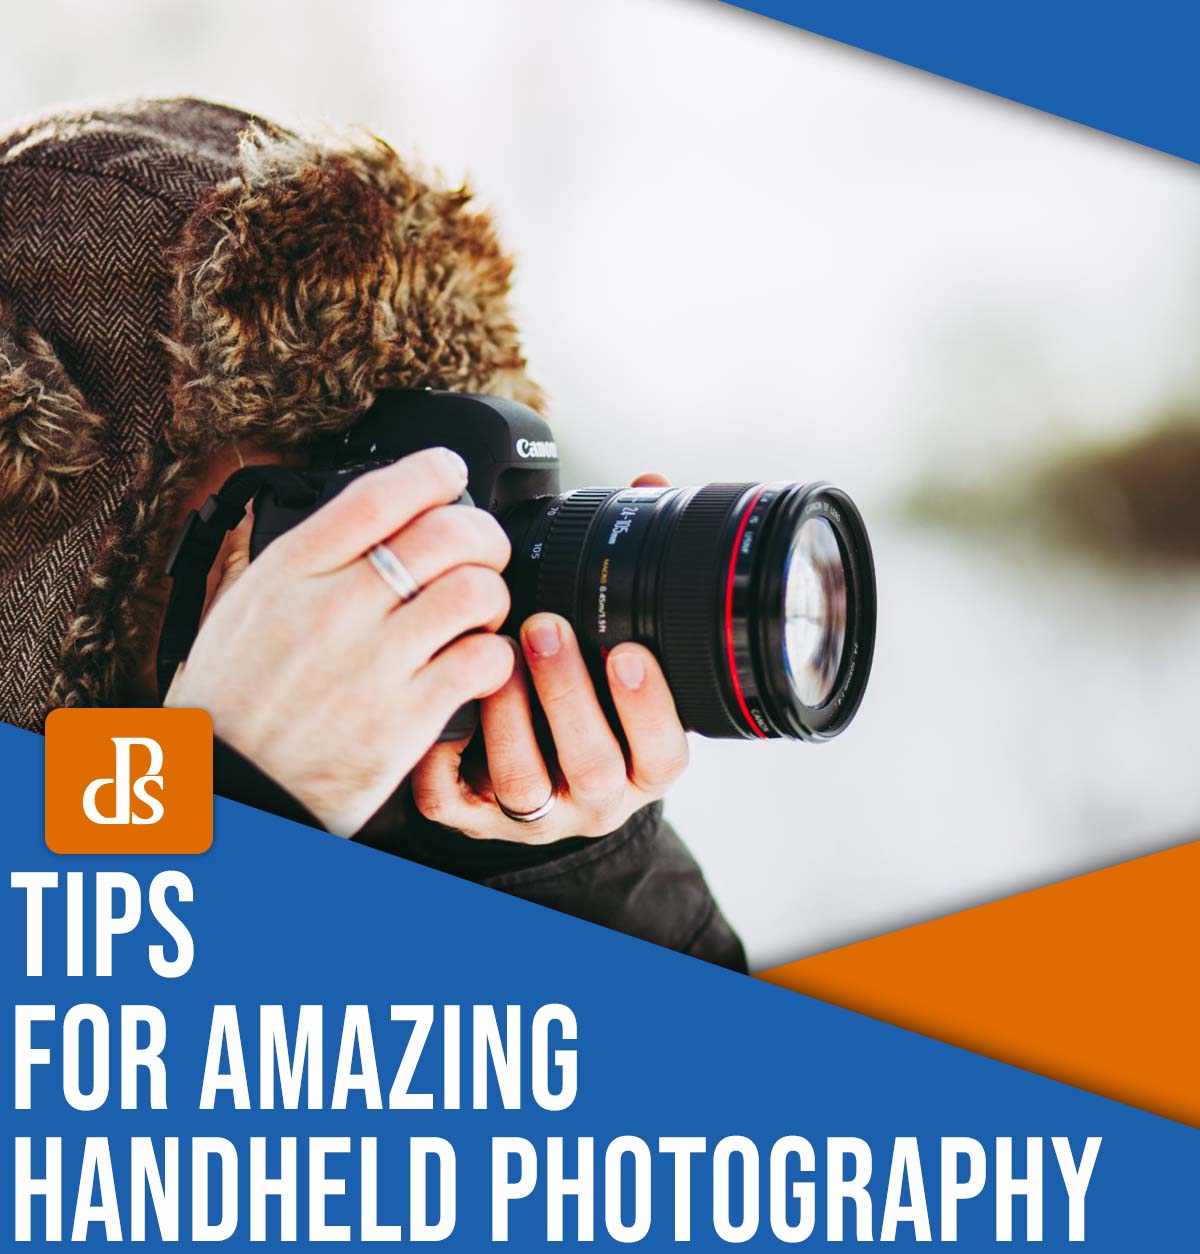 Tips for amazing handheld photography